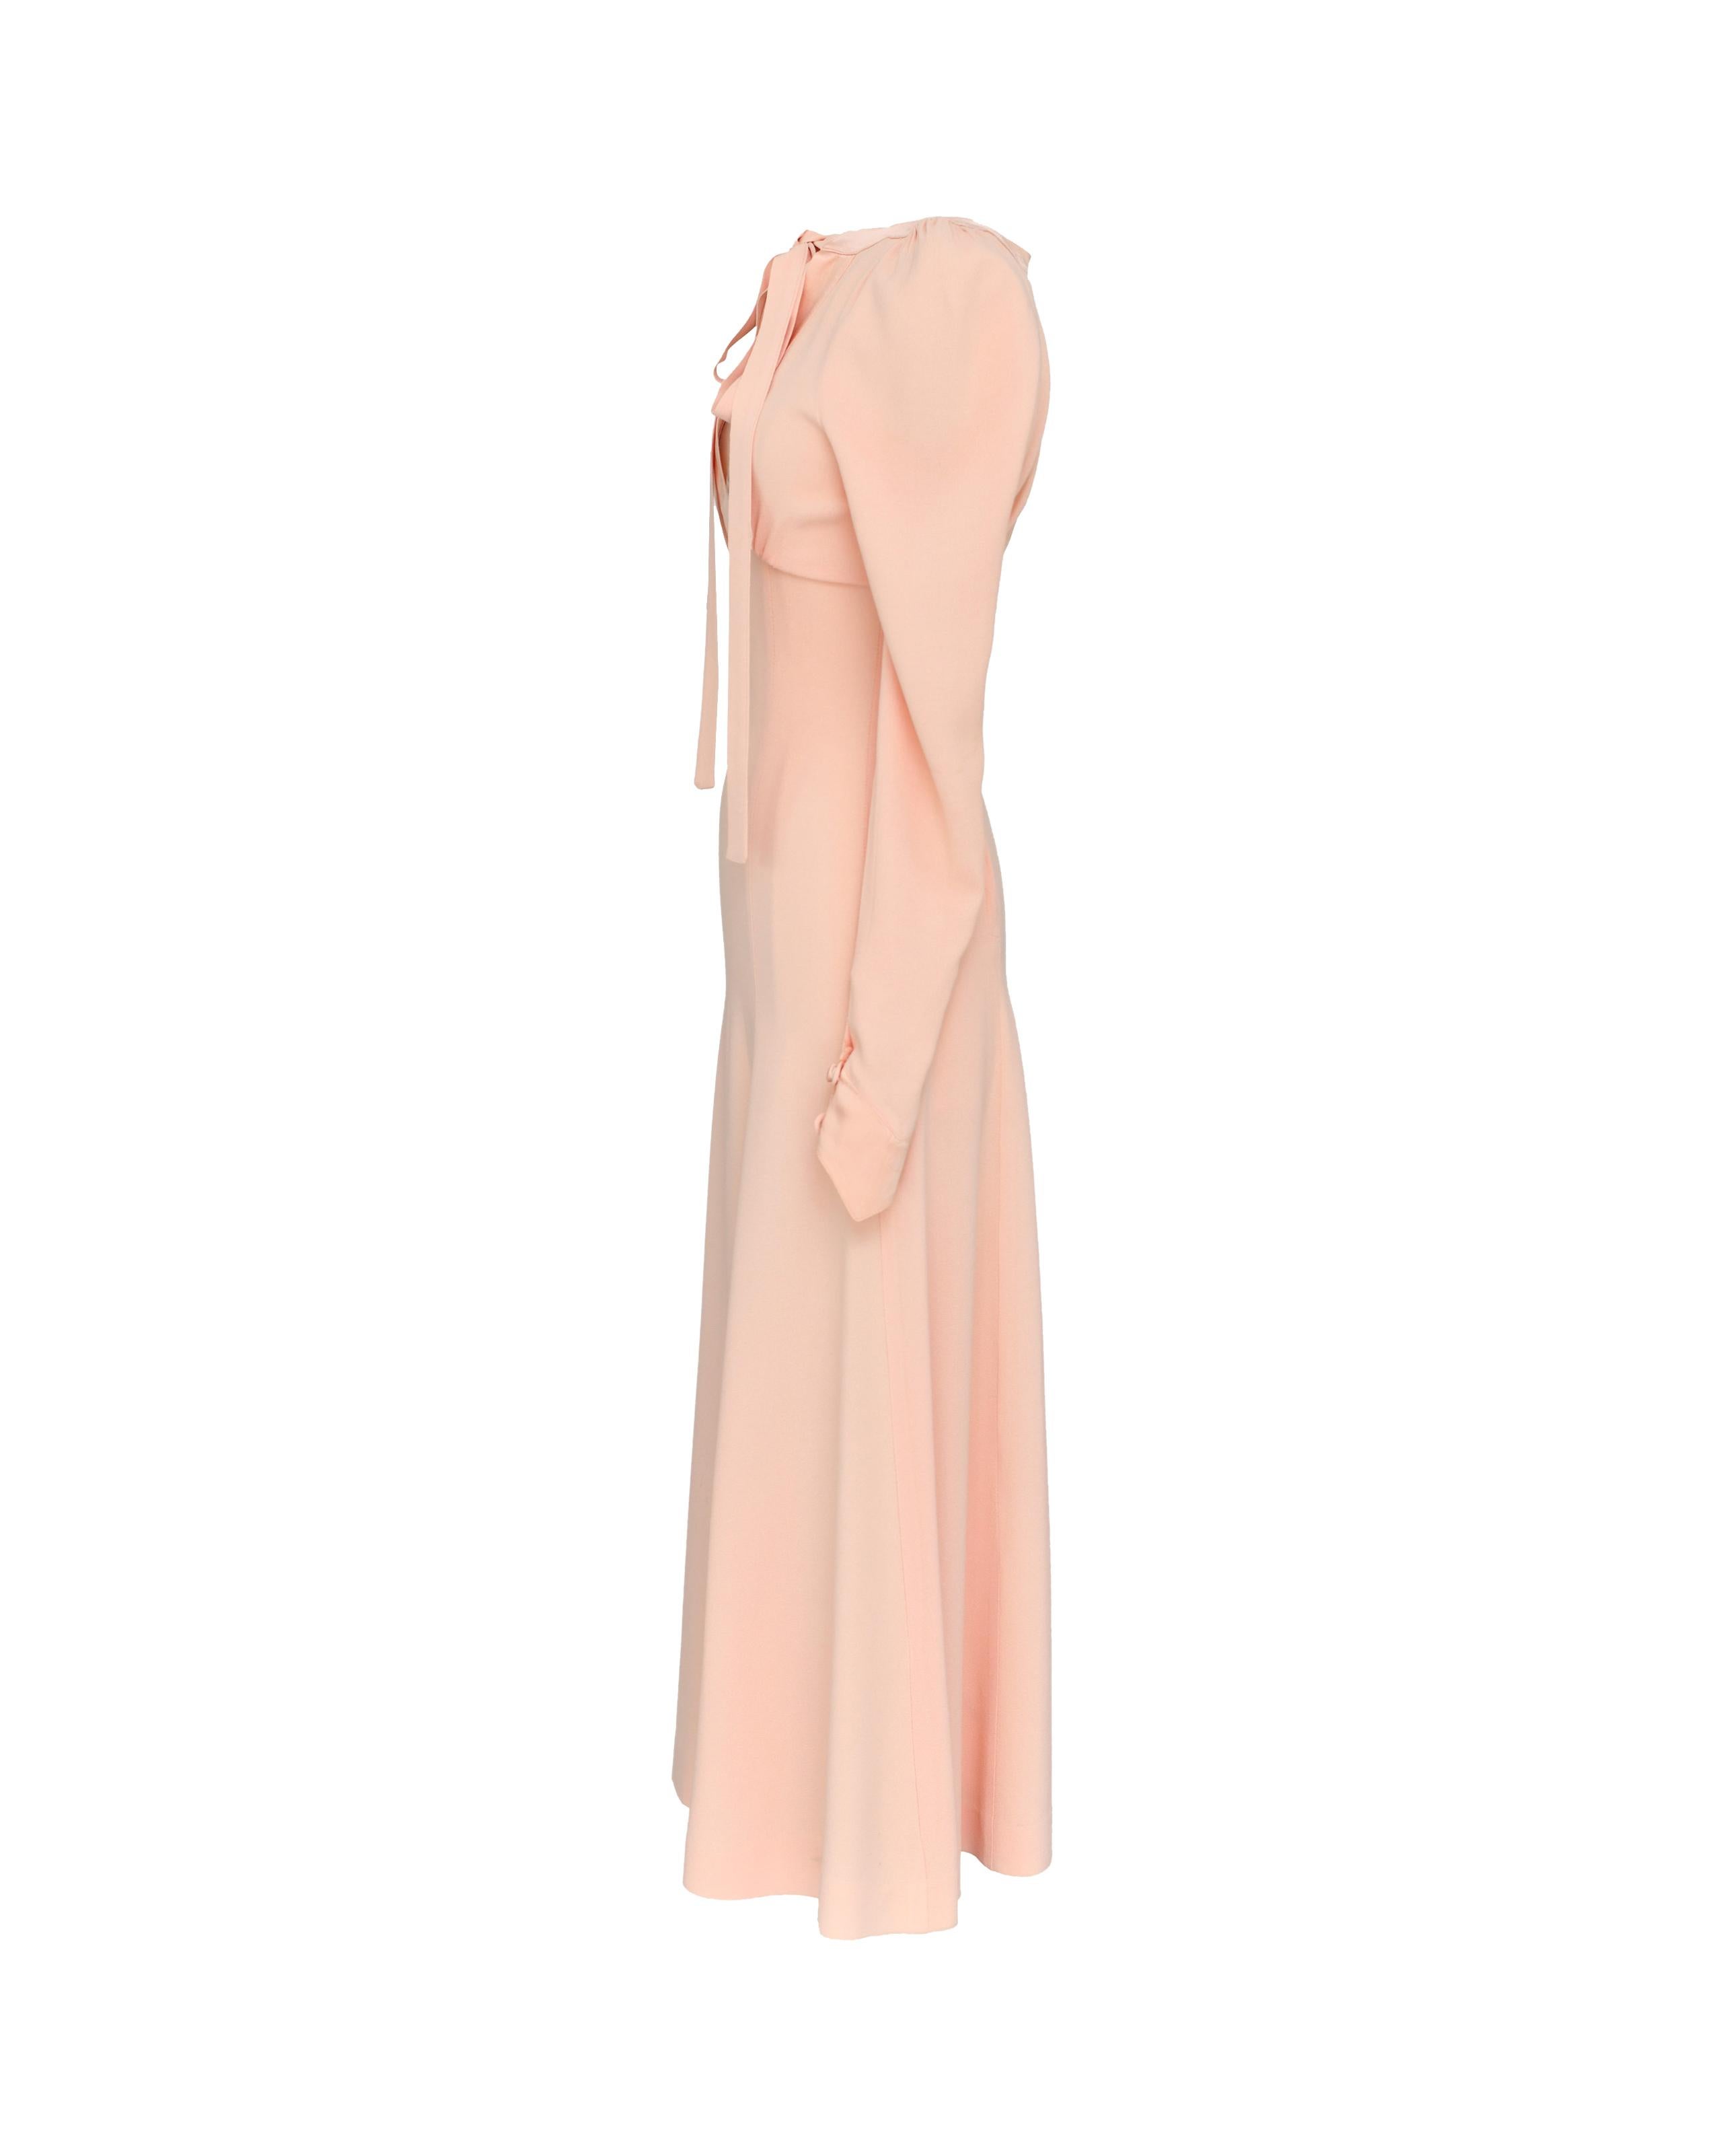 1970's Ossie Clark for Radley cotton candy pink crepe dress with silk tie front. Open back cutout and concealed side zip closure. Literally 'topped with a bow' silk trim and unique pointed silk cuffs. 